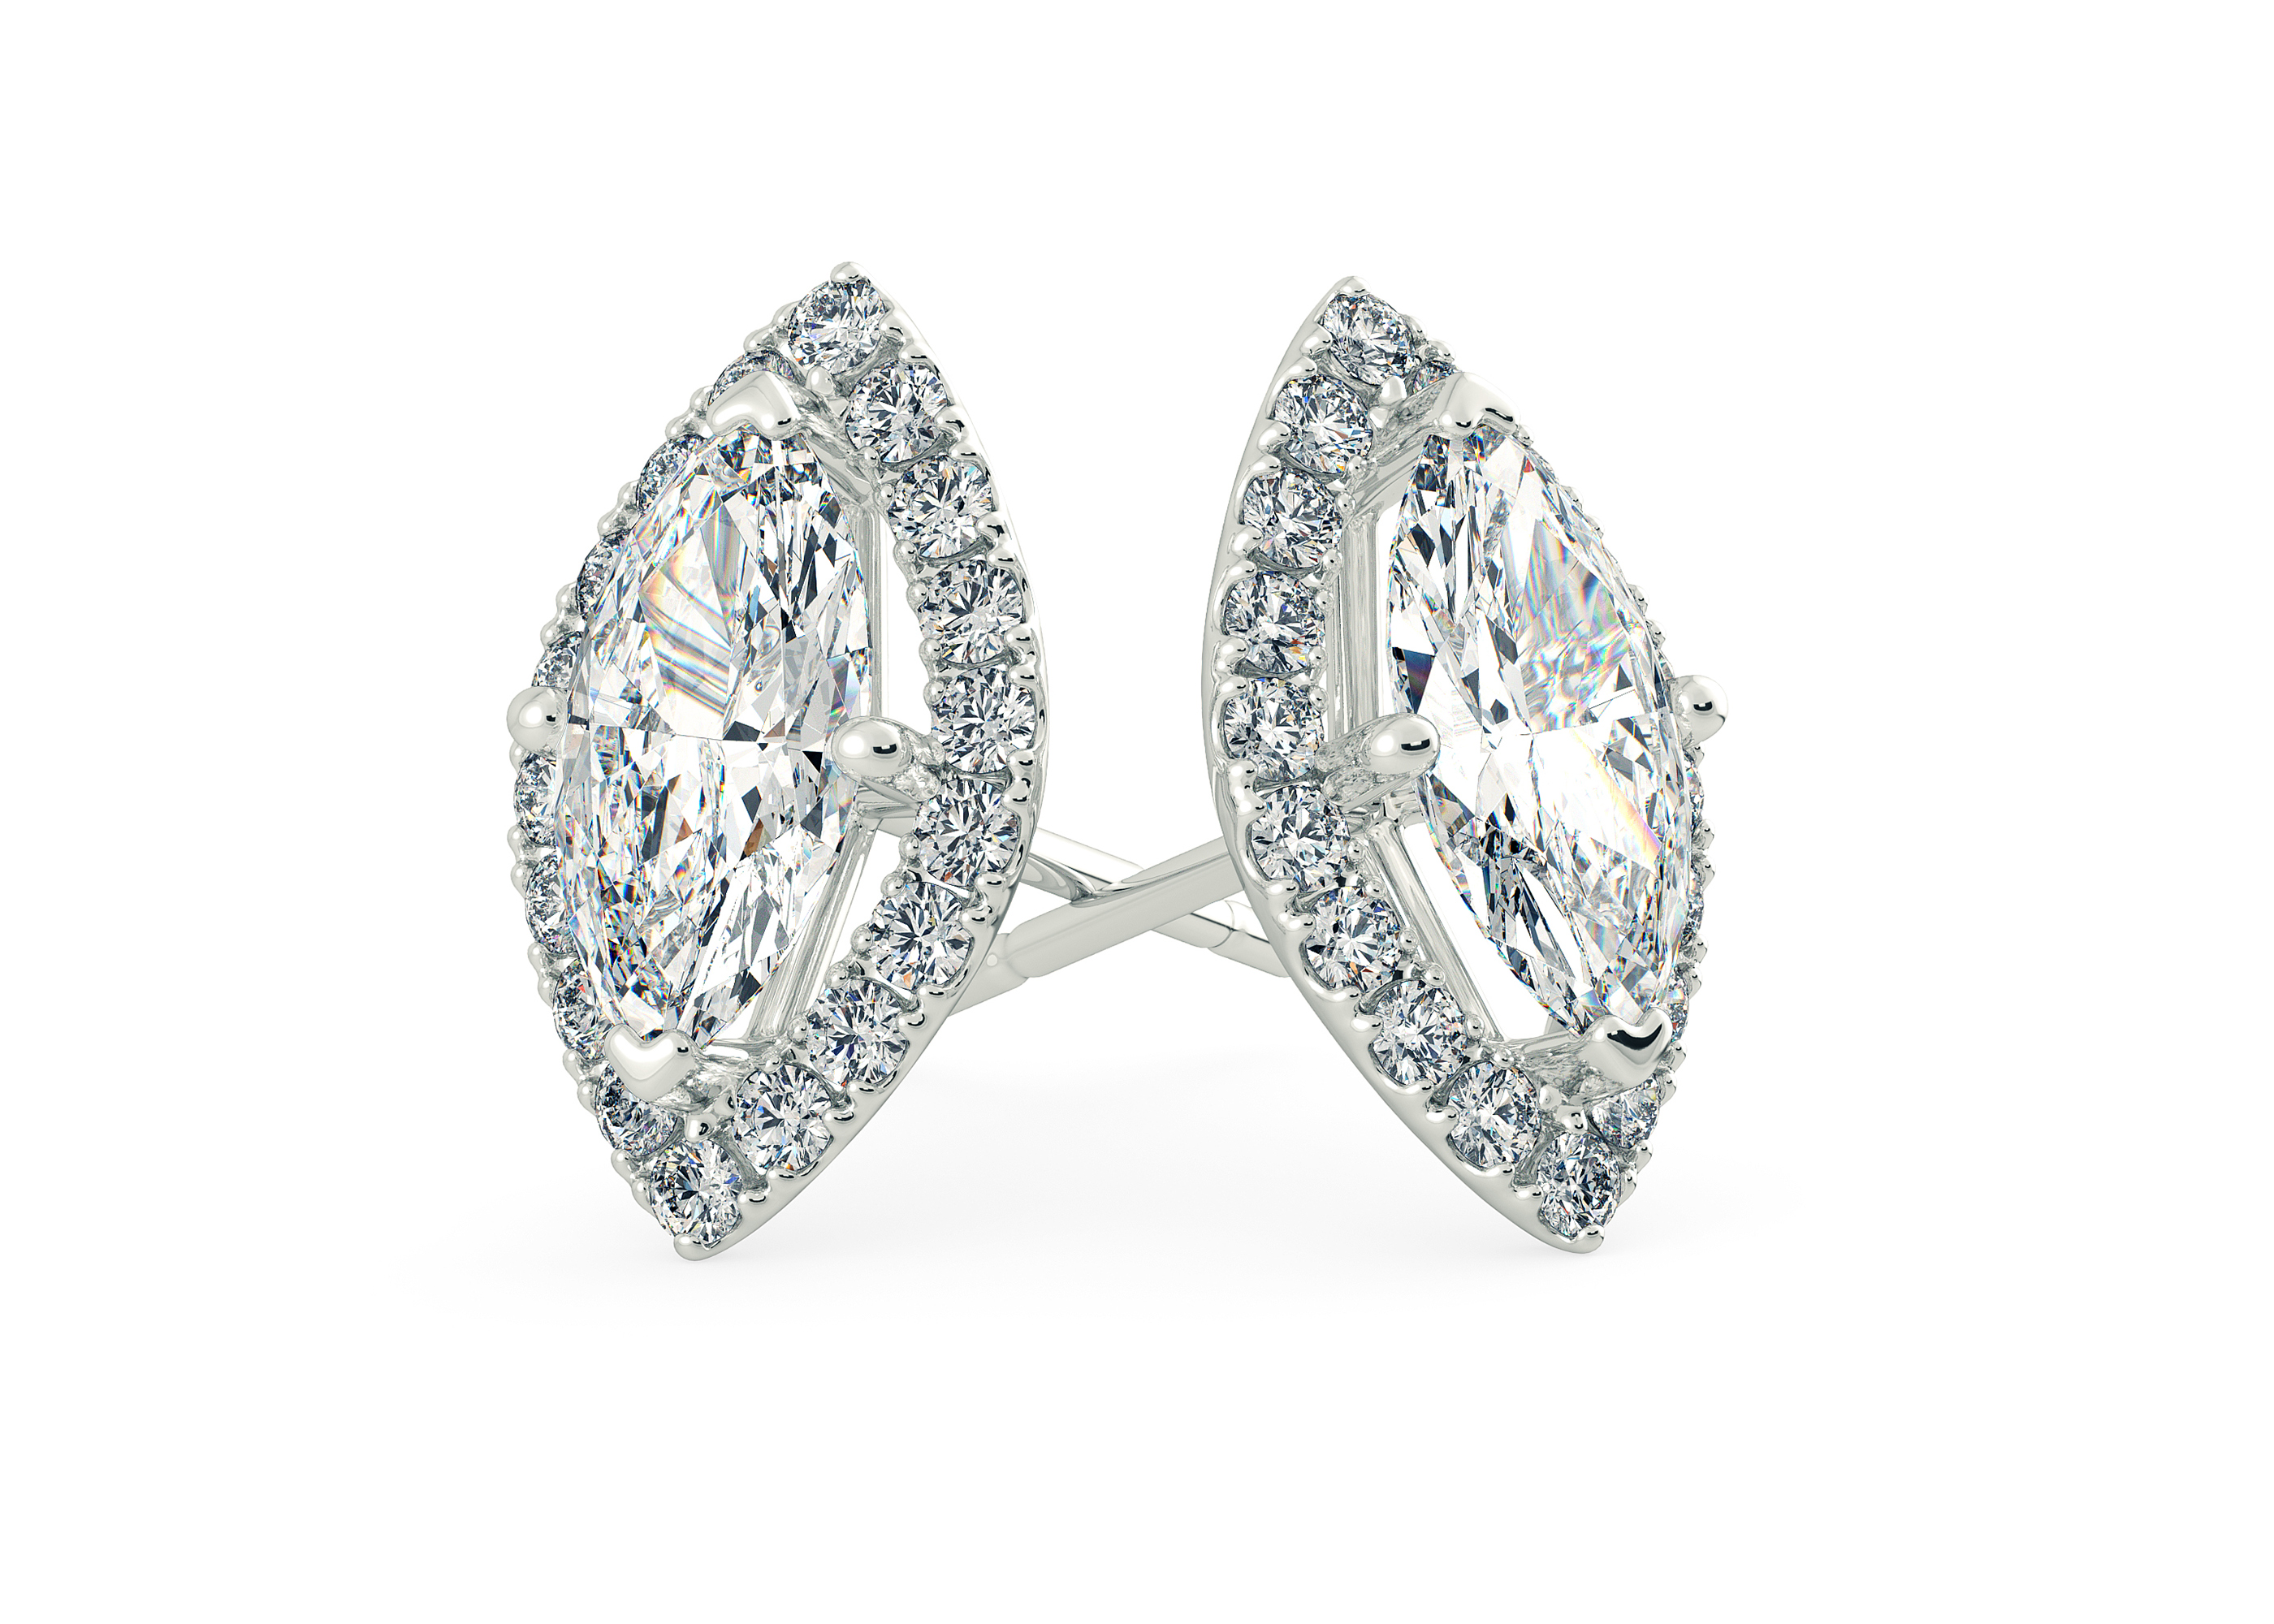 Bijou Marquise Diamond Stud Earrings in Platinum with Butterfly Backs